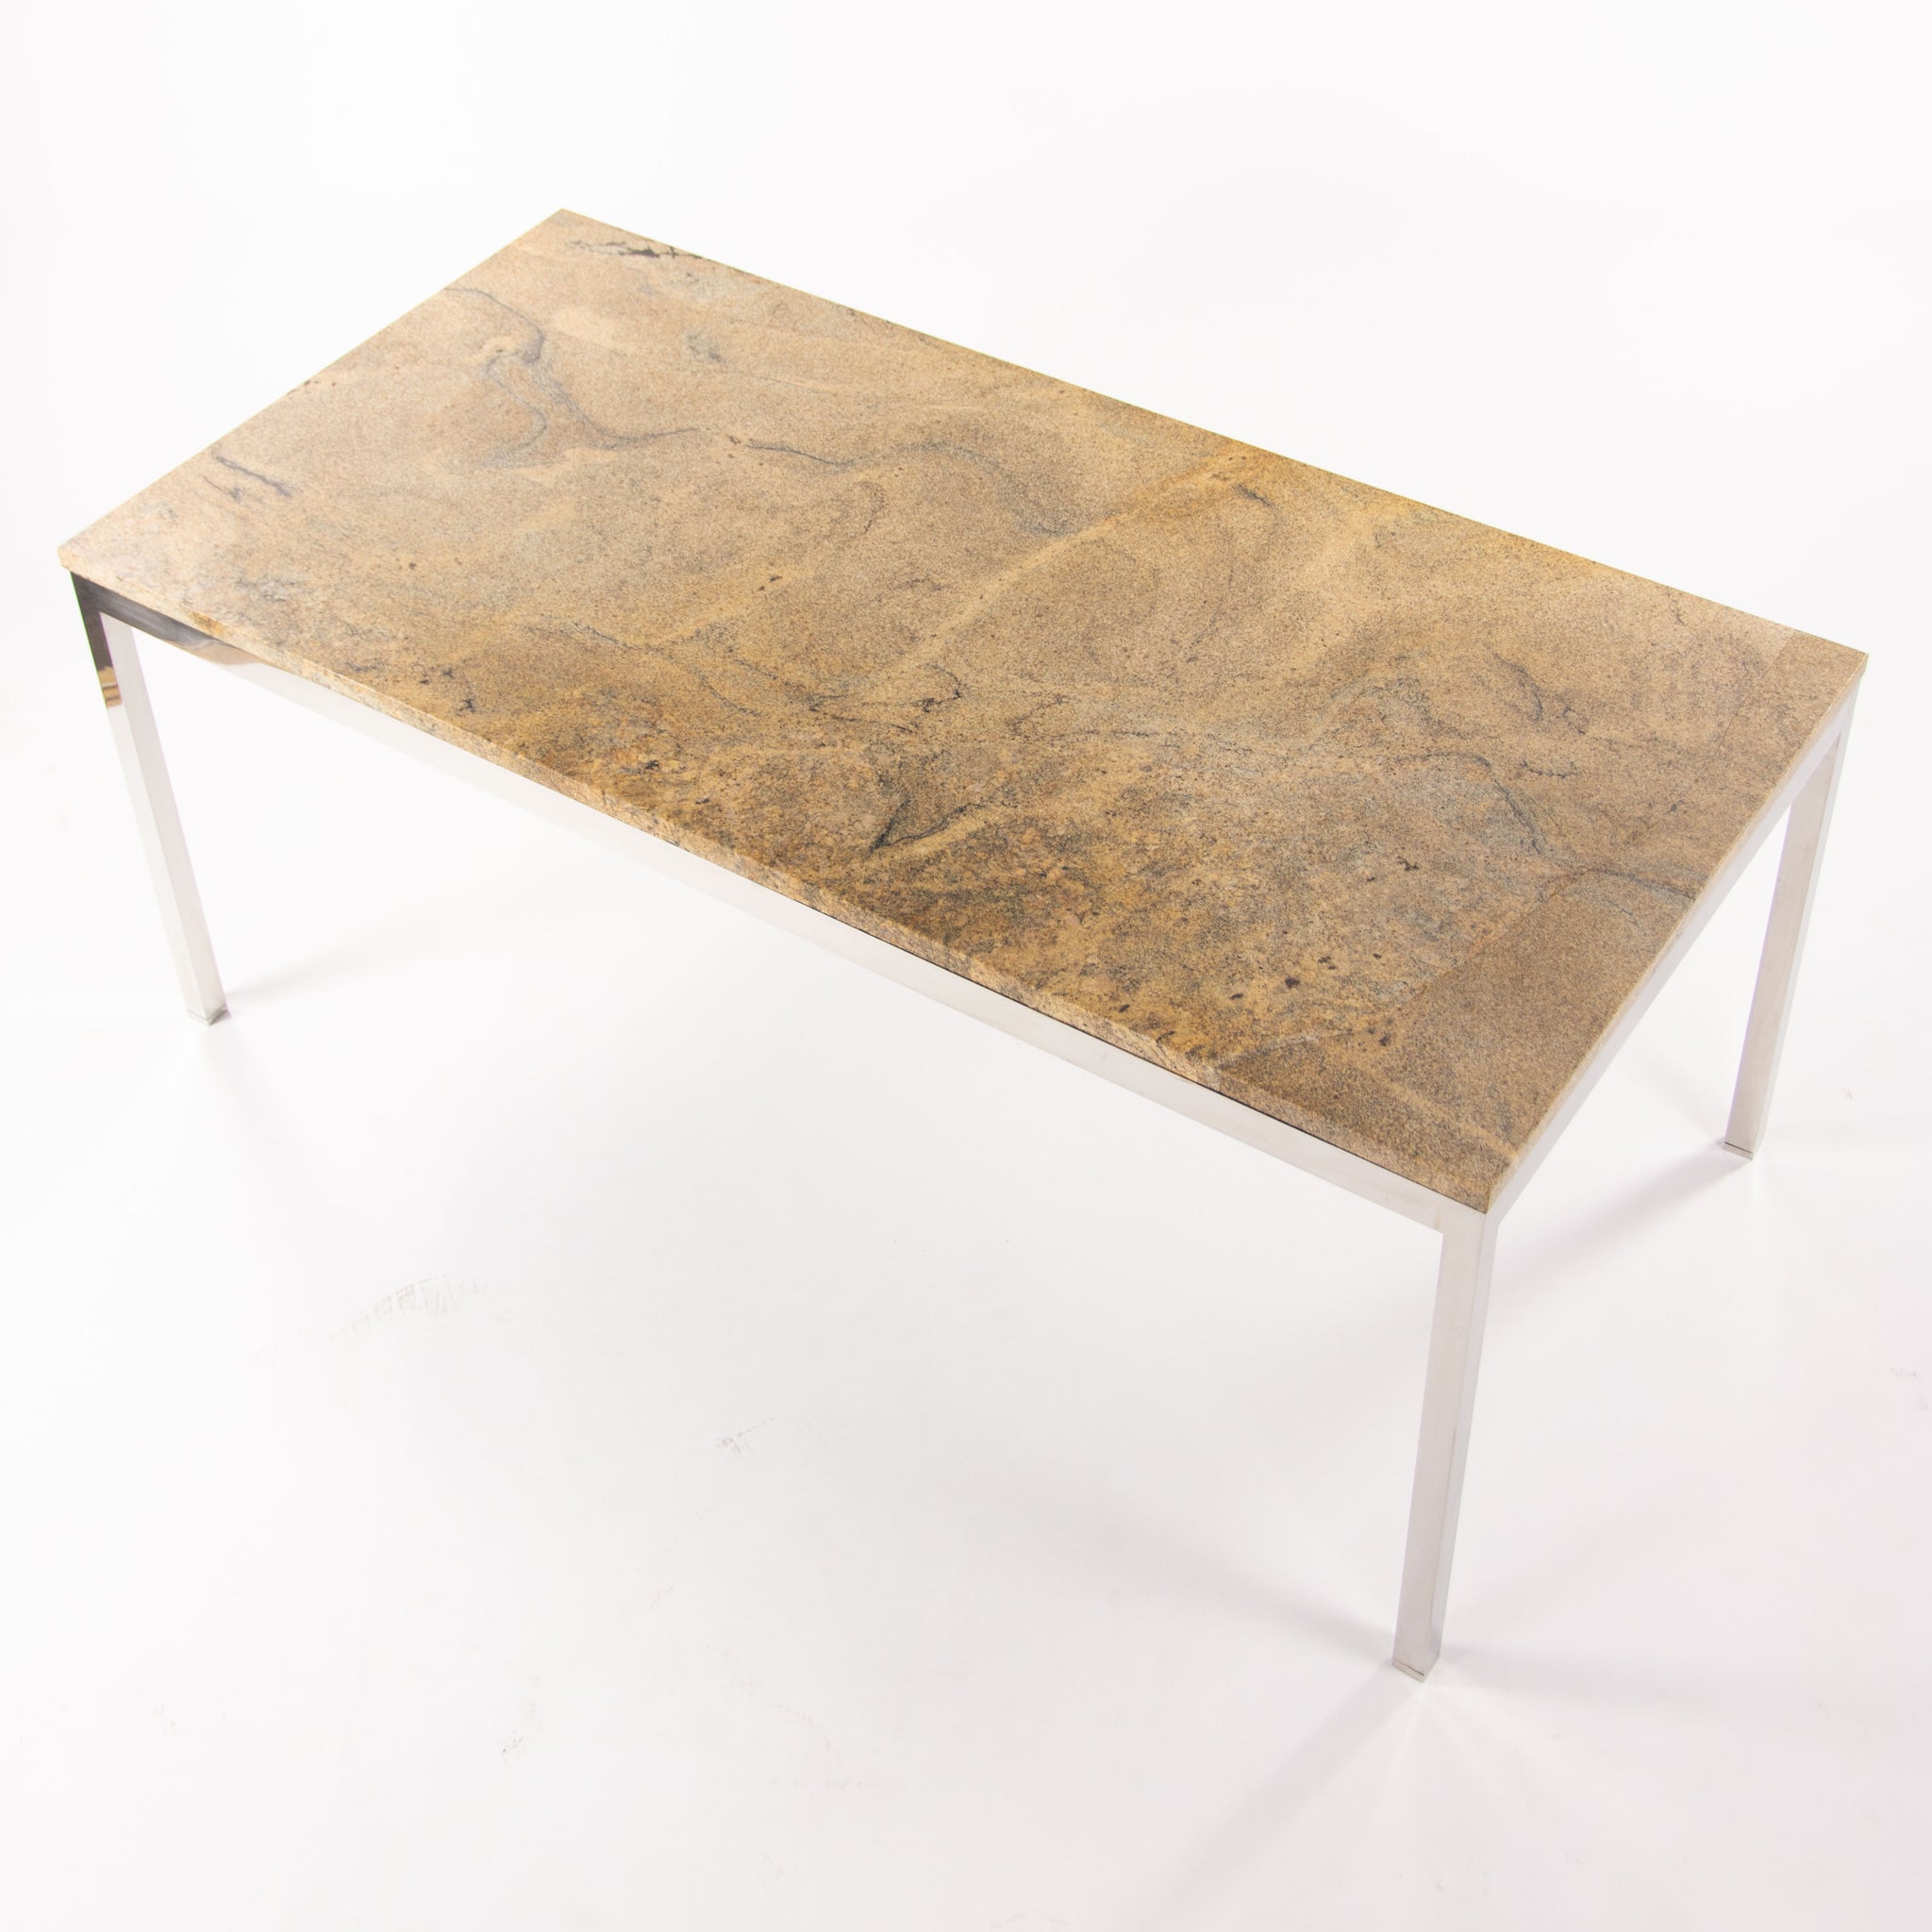 Marble 6x3 Meeting Dining Conference Table Tan w/ Stainless Steel Base Knoll